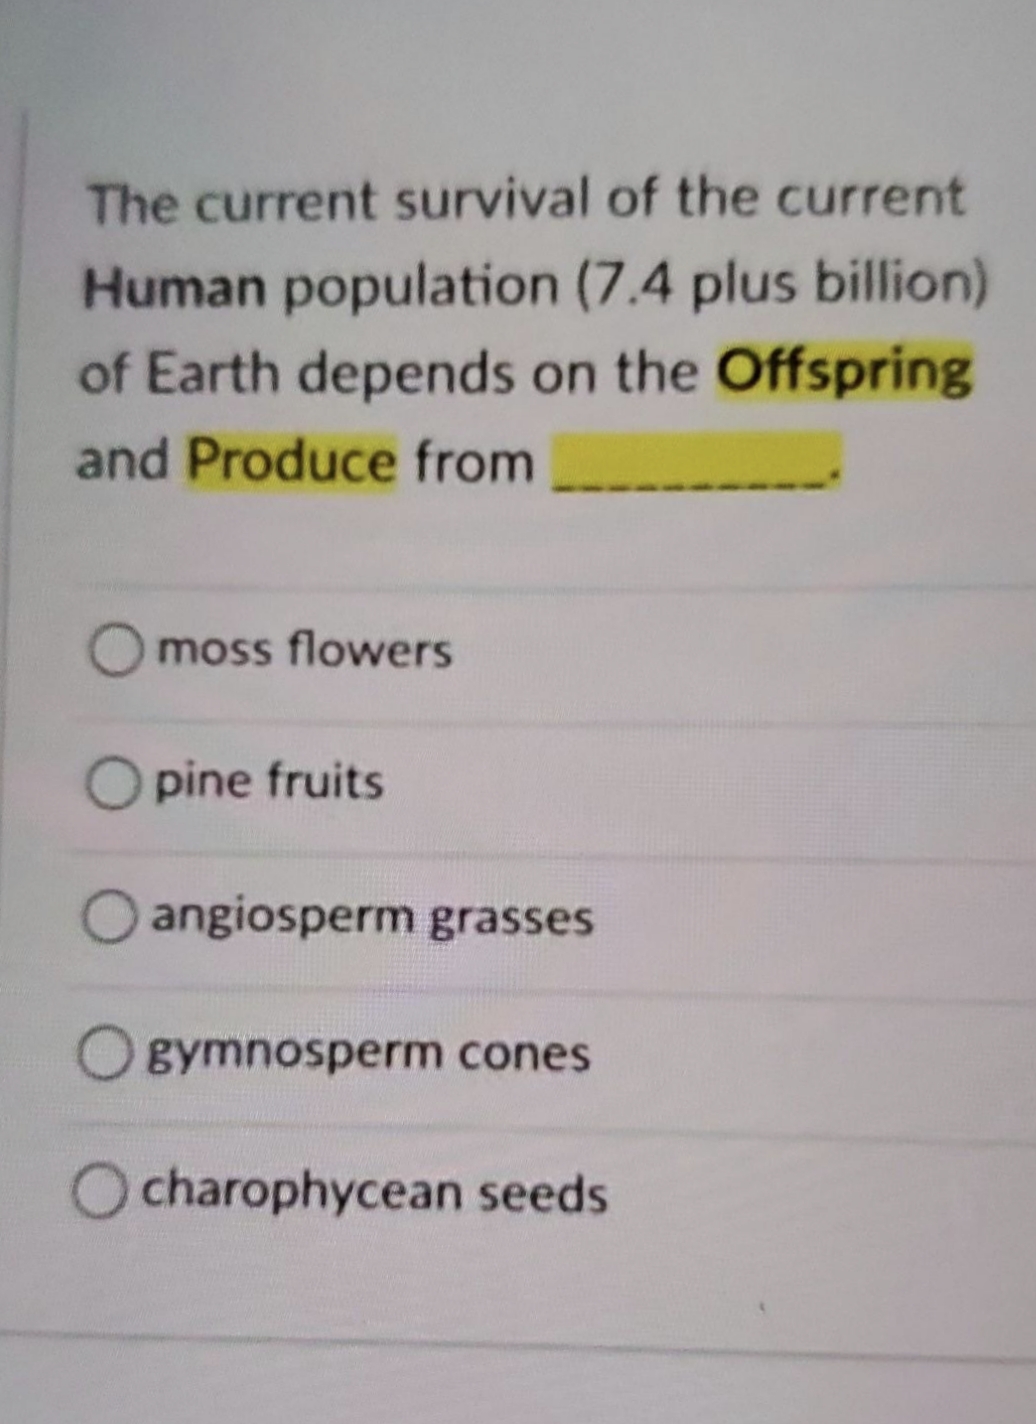 The current survival of the current
Human population (7.4 plus billion)
of Earth depends on the Offspring
and Produce from
Omoss flowers
O pine fruits
angiosperm grasses
Ogymnosperm cones
charophycean seeds